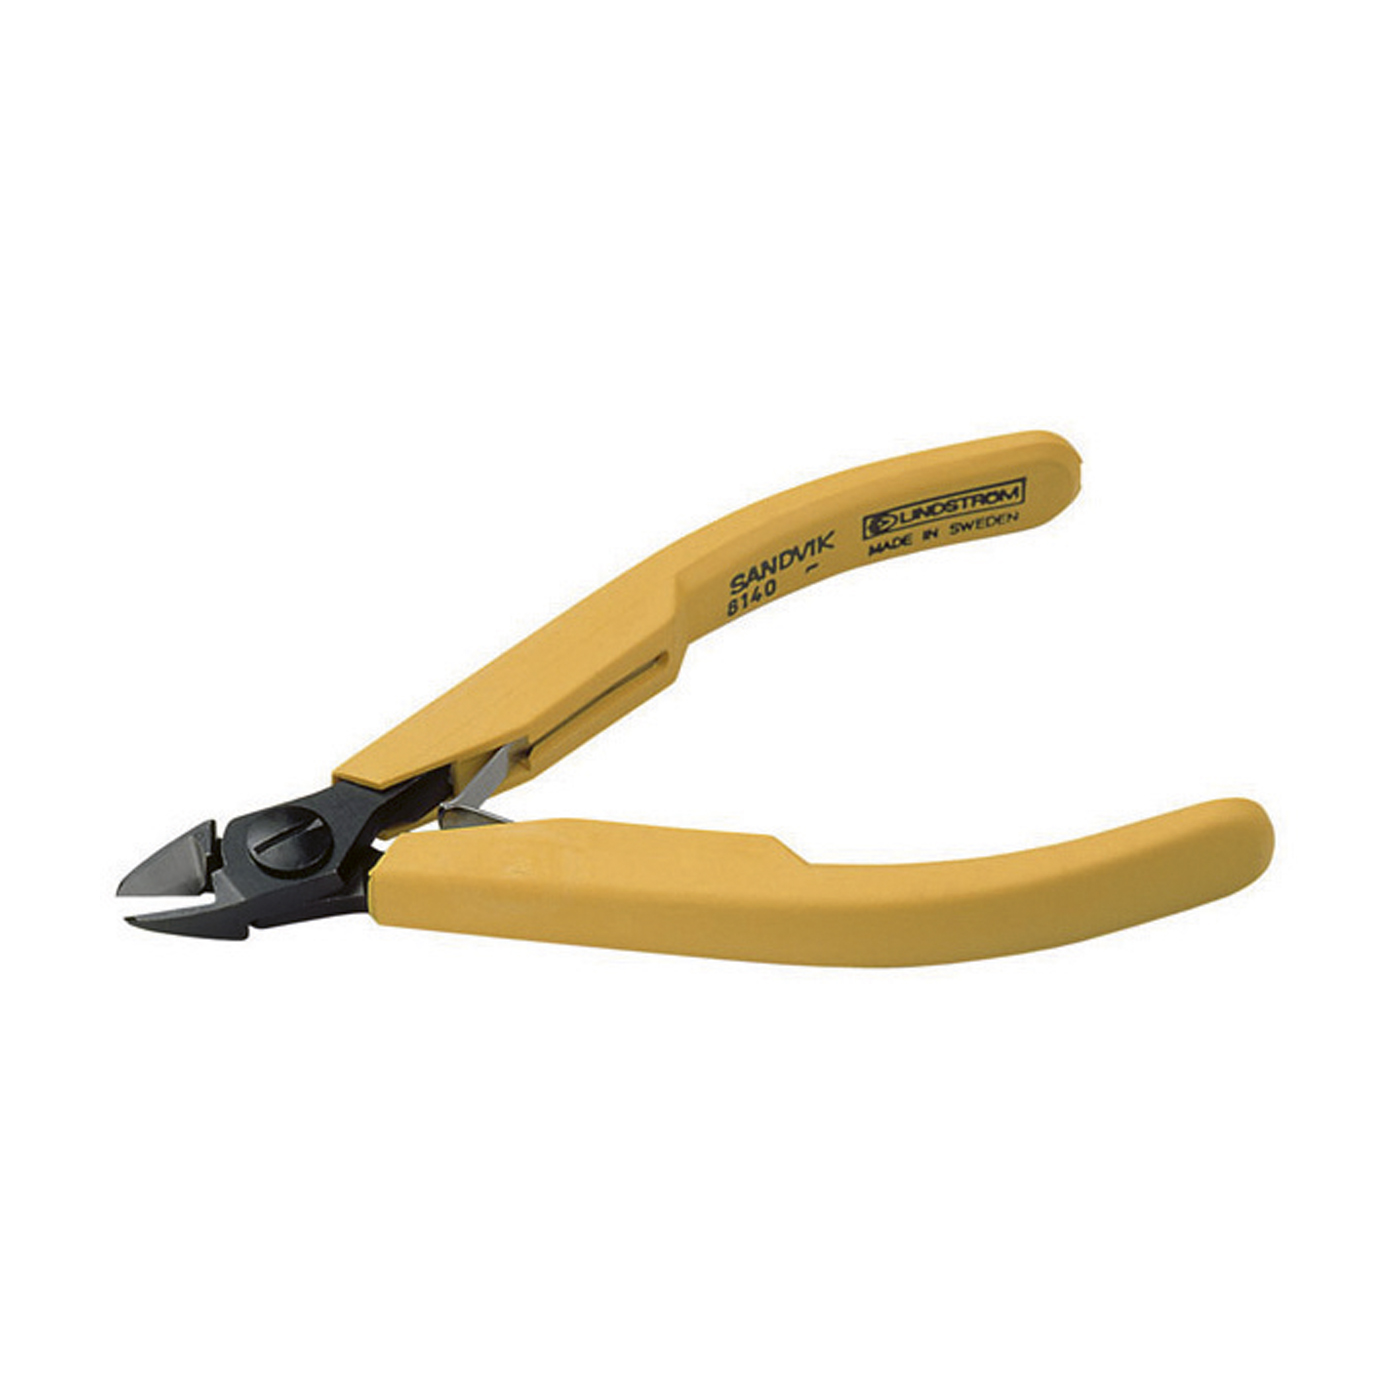 Wire Cutter 8140, Micro-Bevel, Oval, 110 mm - 1 piece